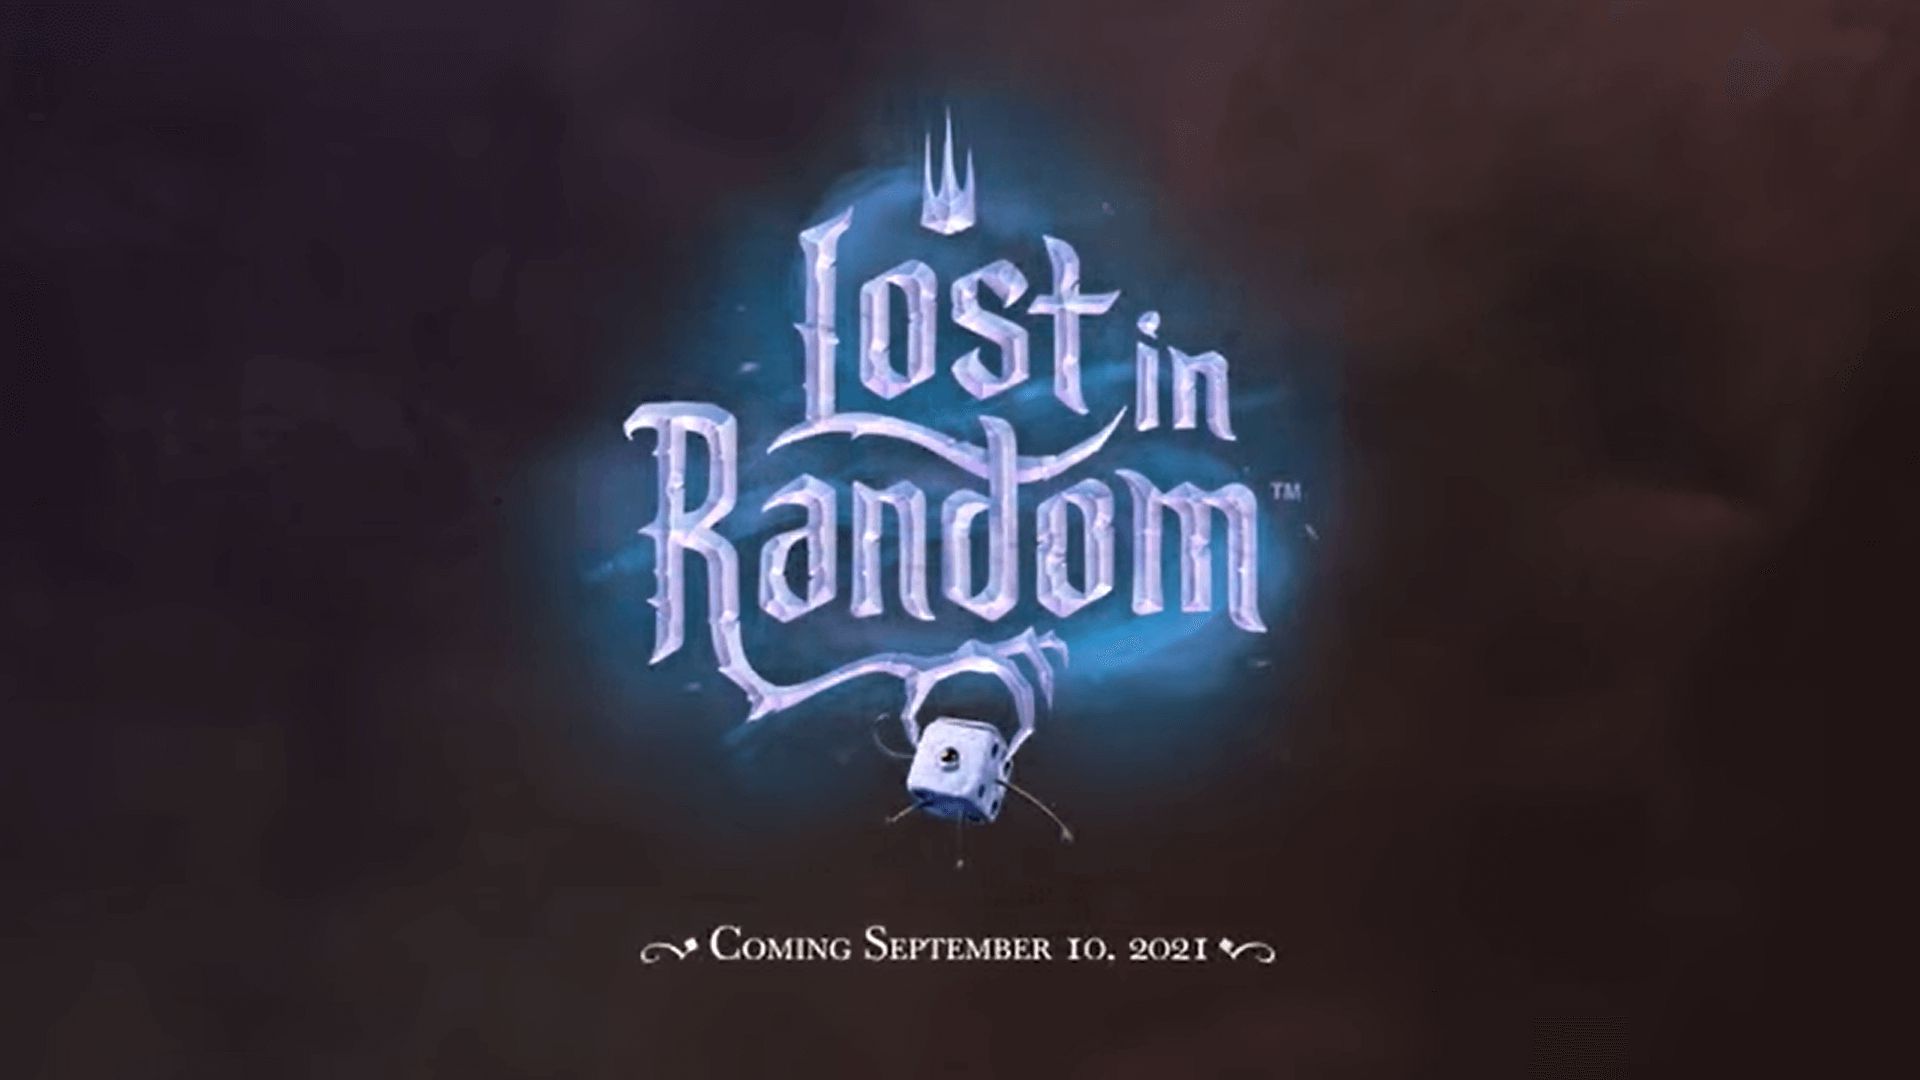 download free games similar to lost in random